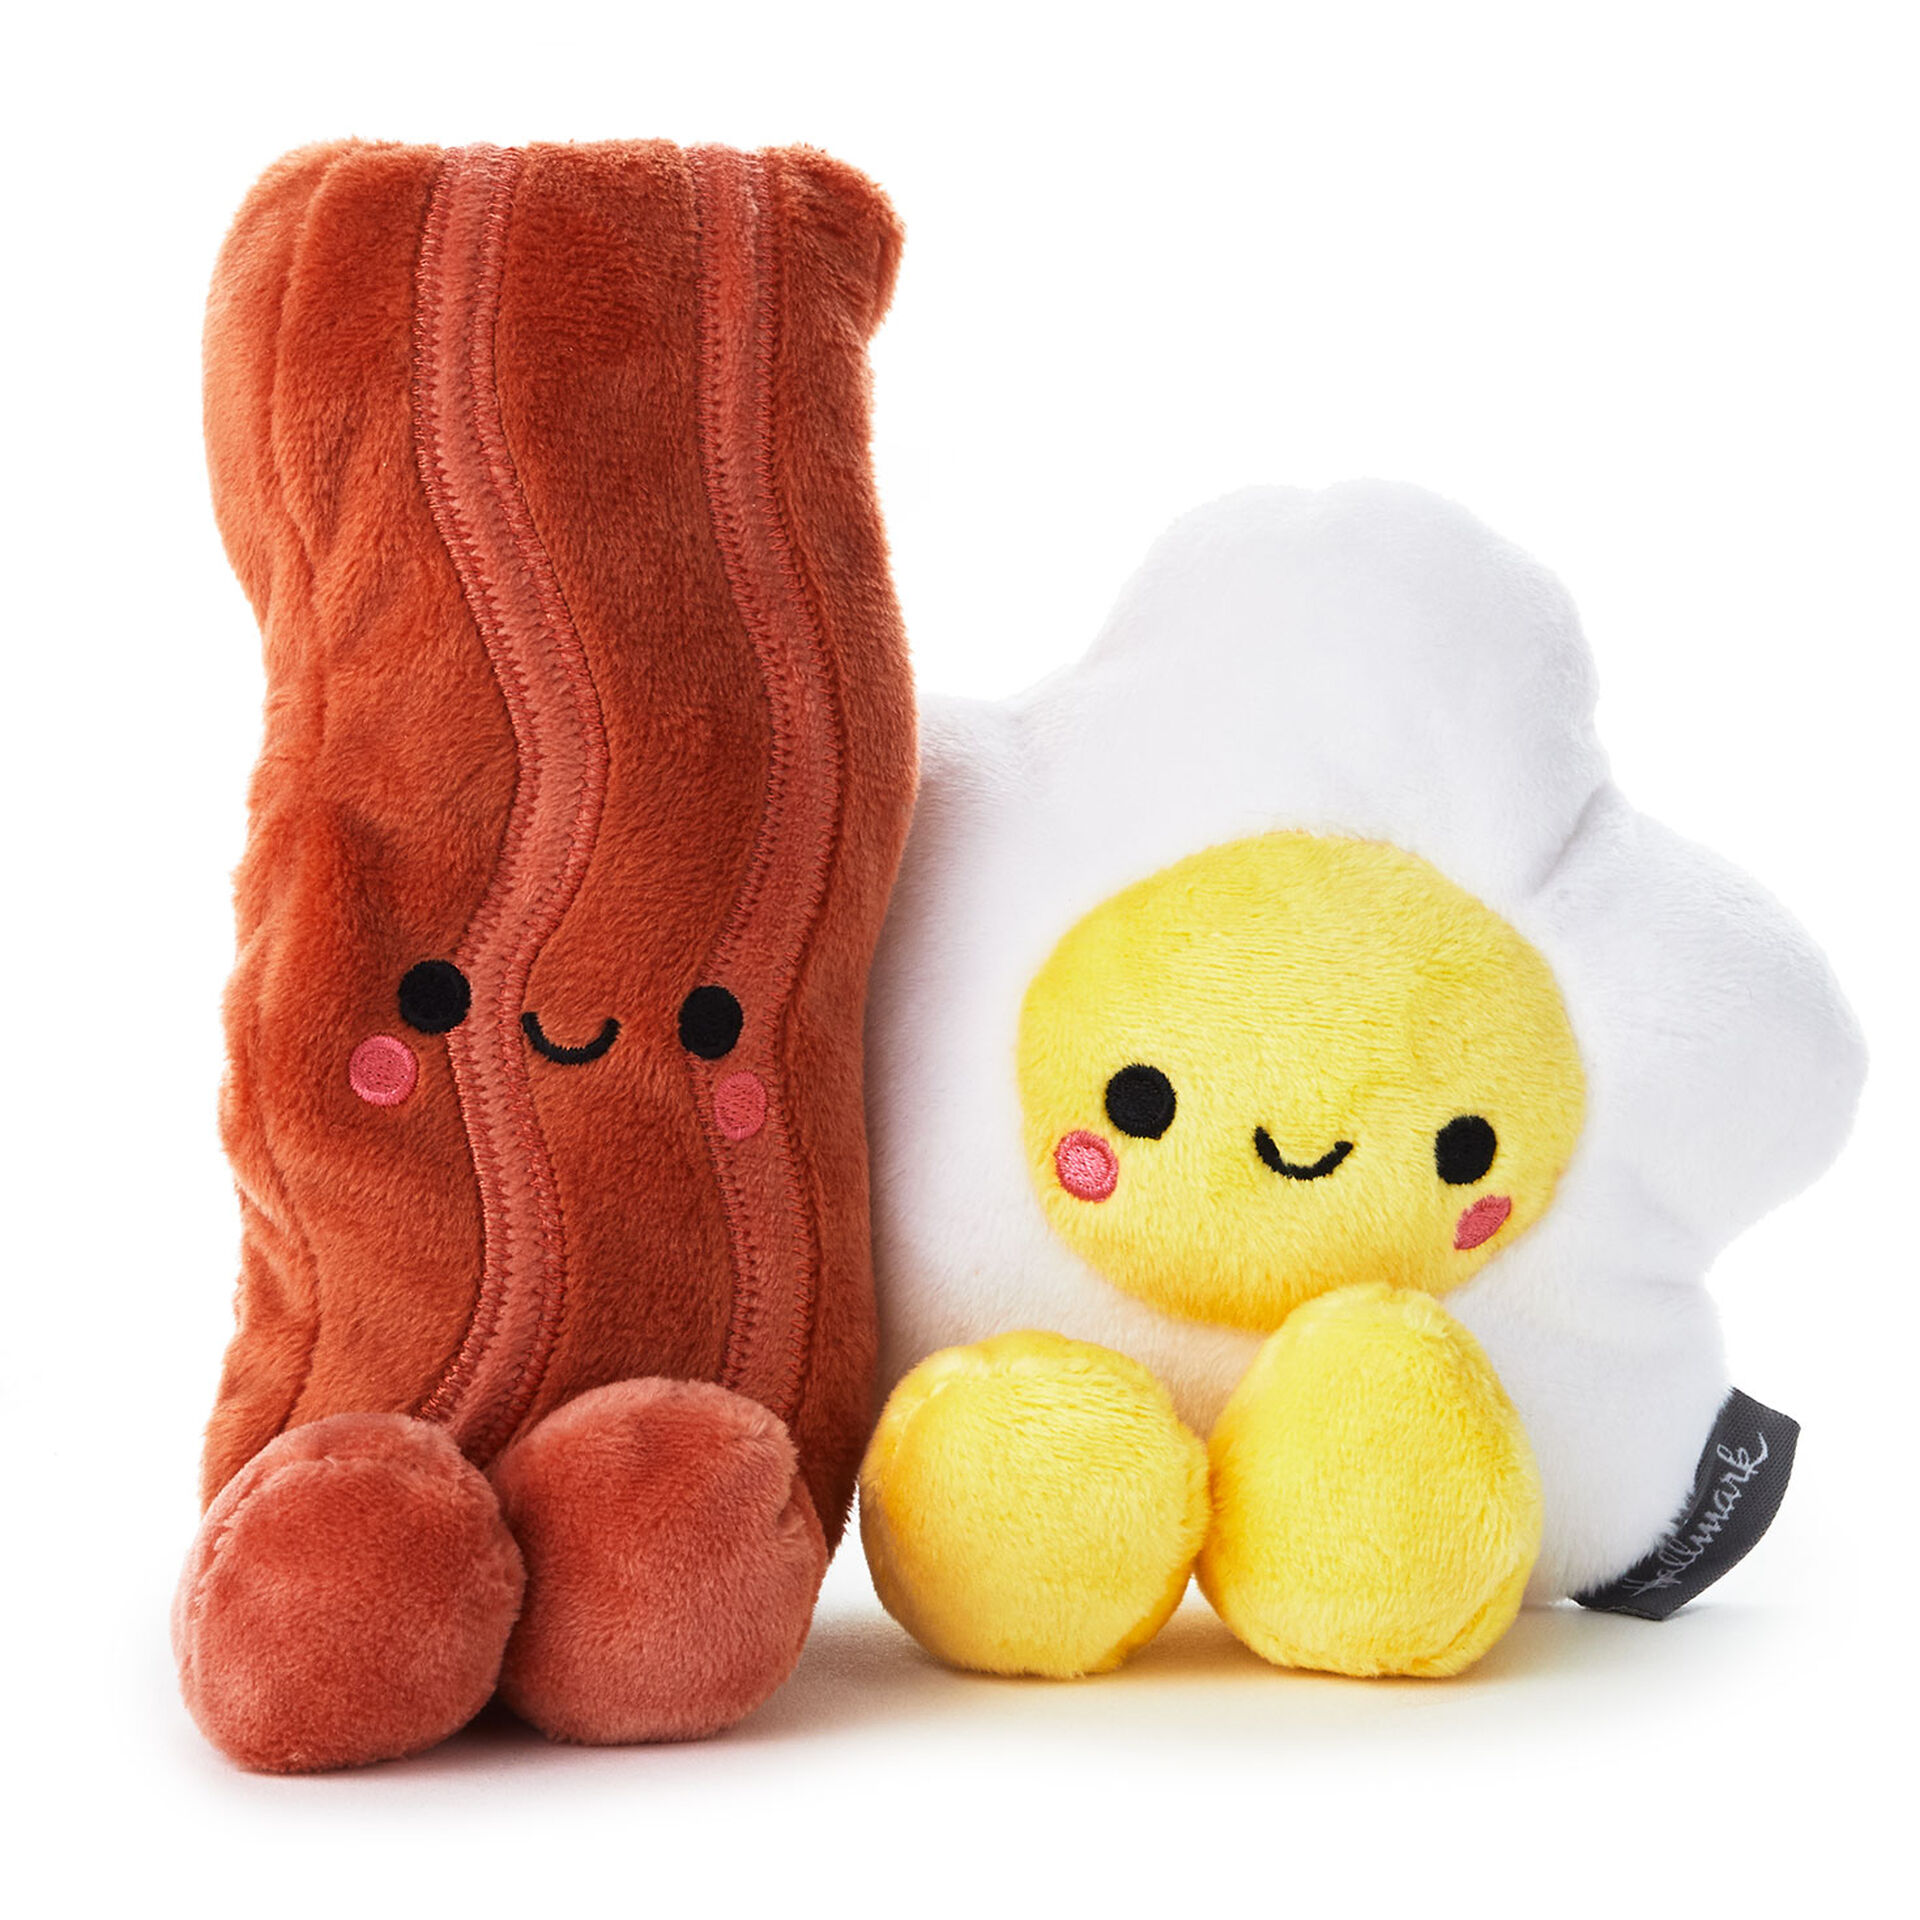 Better Together Bacon and Eggs Magnetic Plush, 6.25" - Classic Stuffed